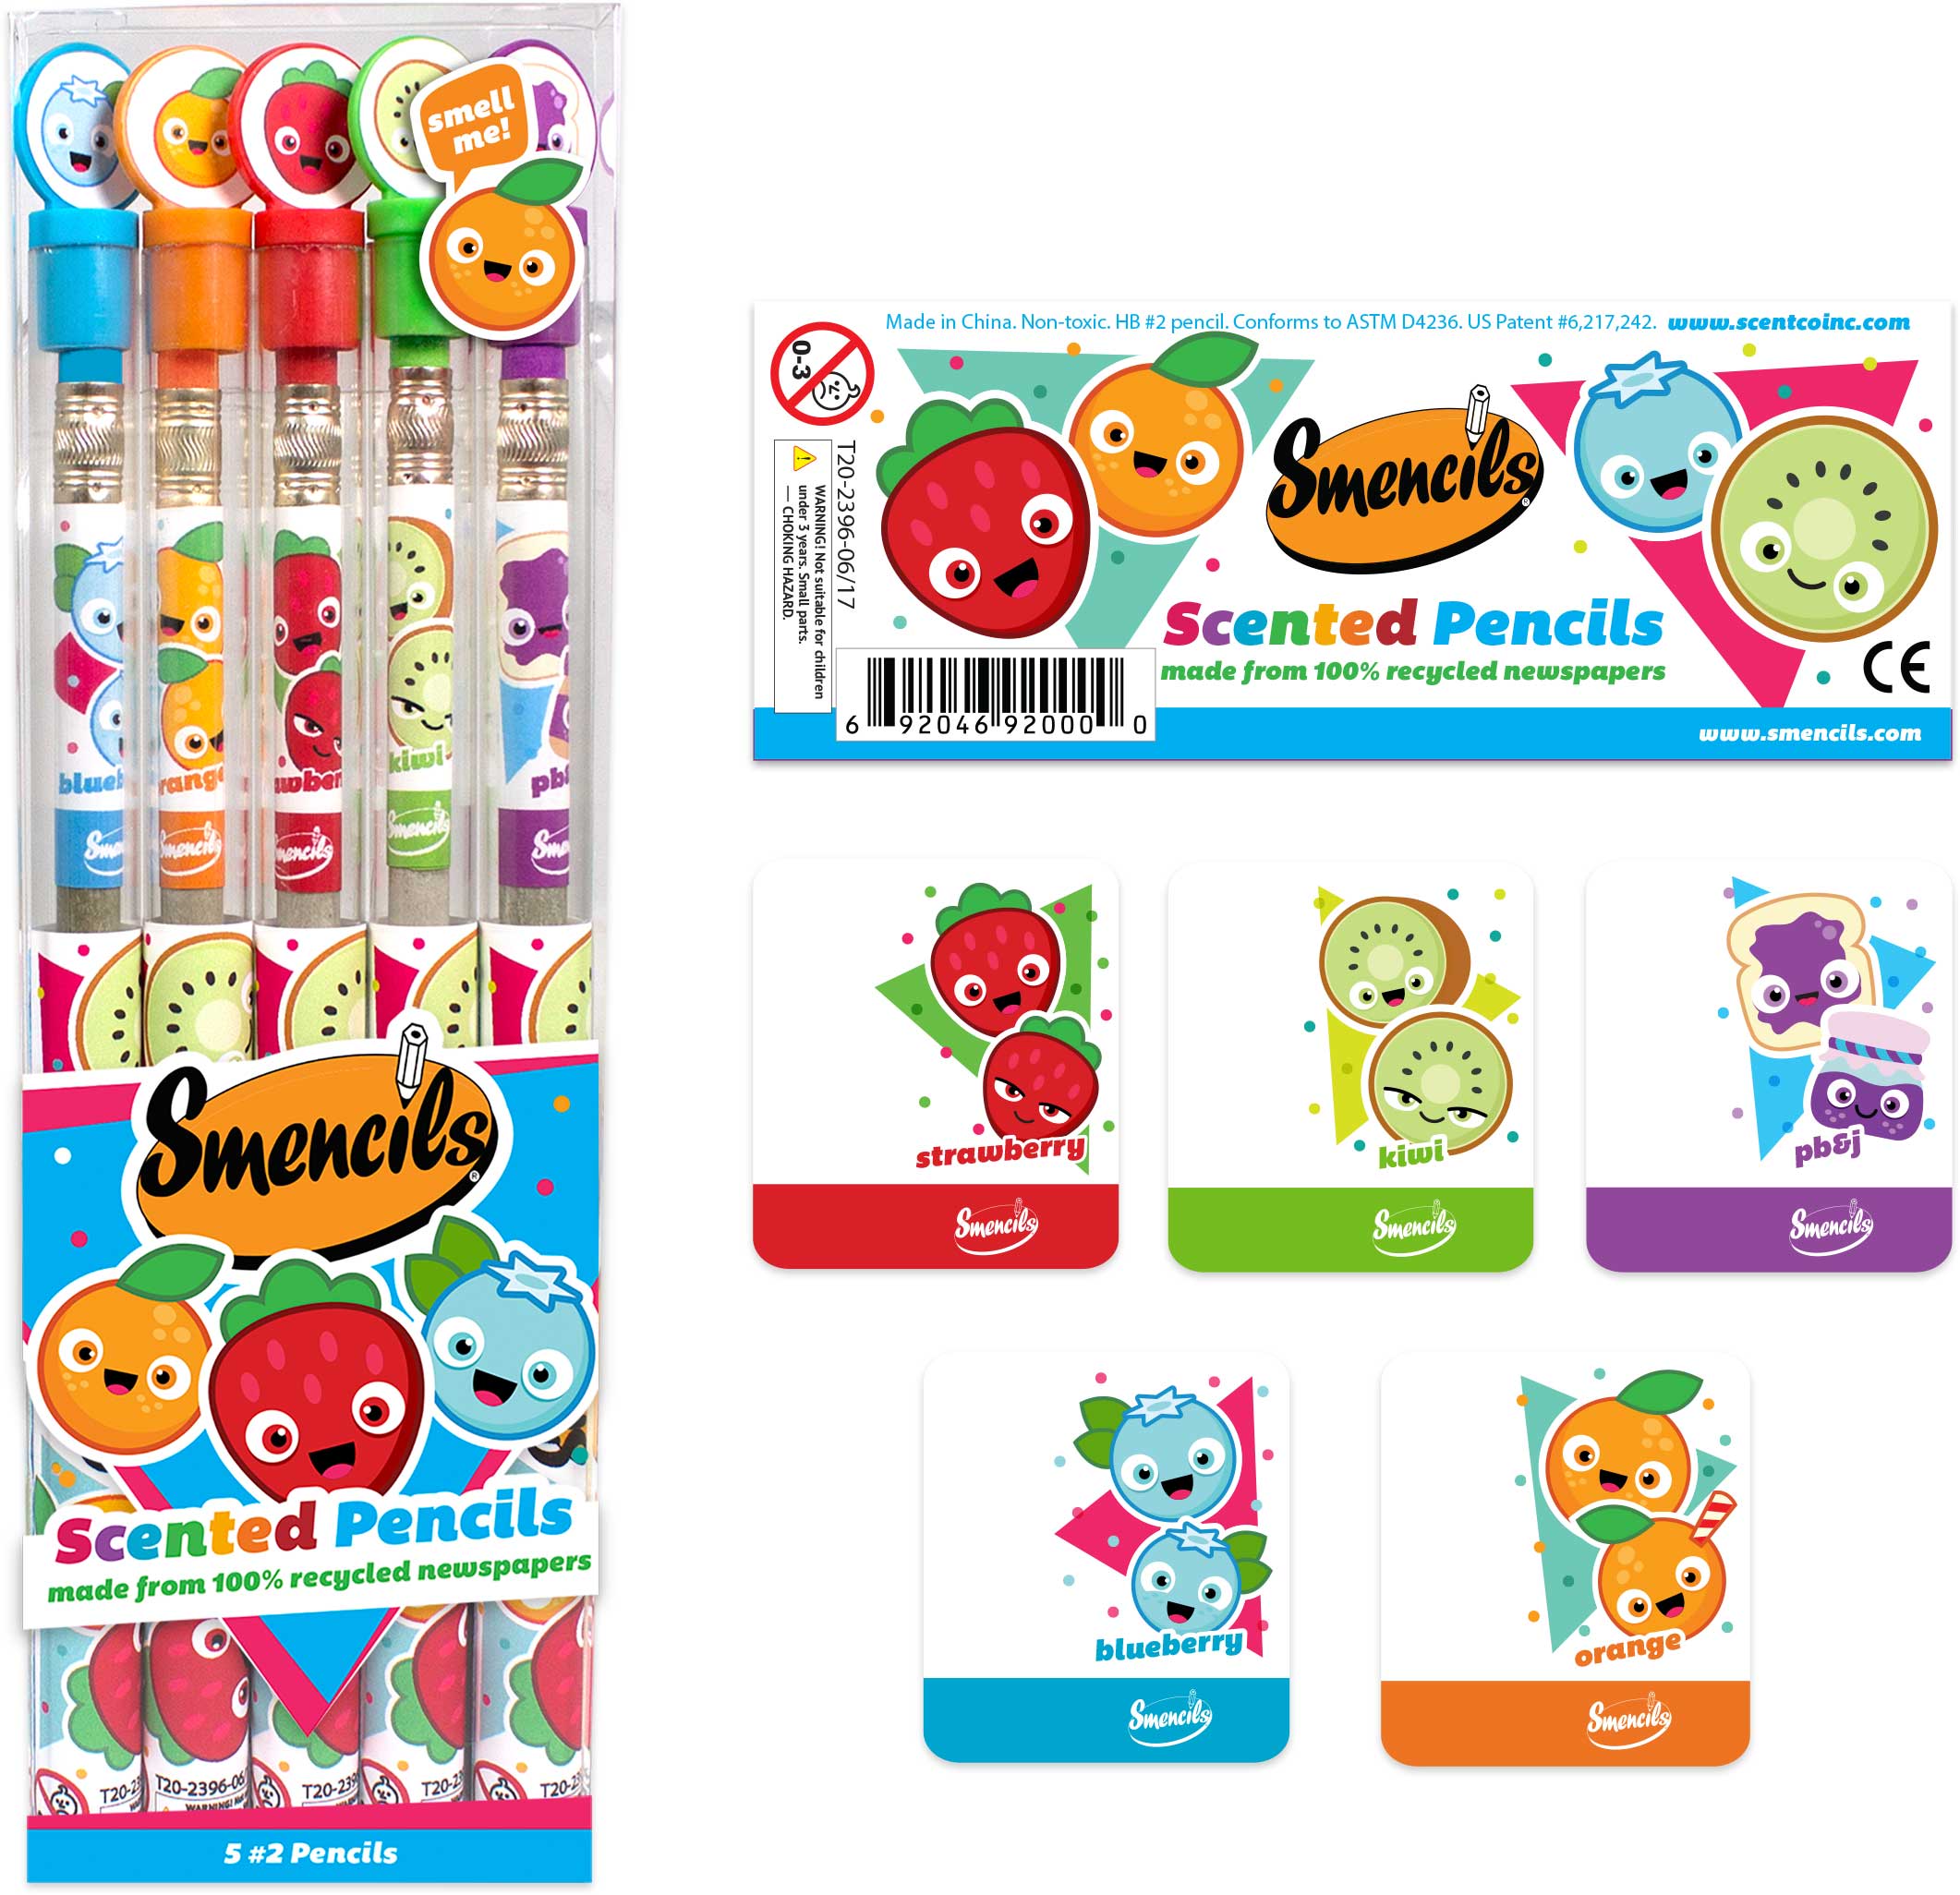 Smencils - Packaging